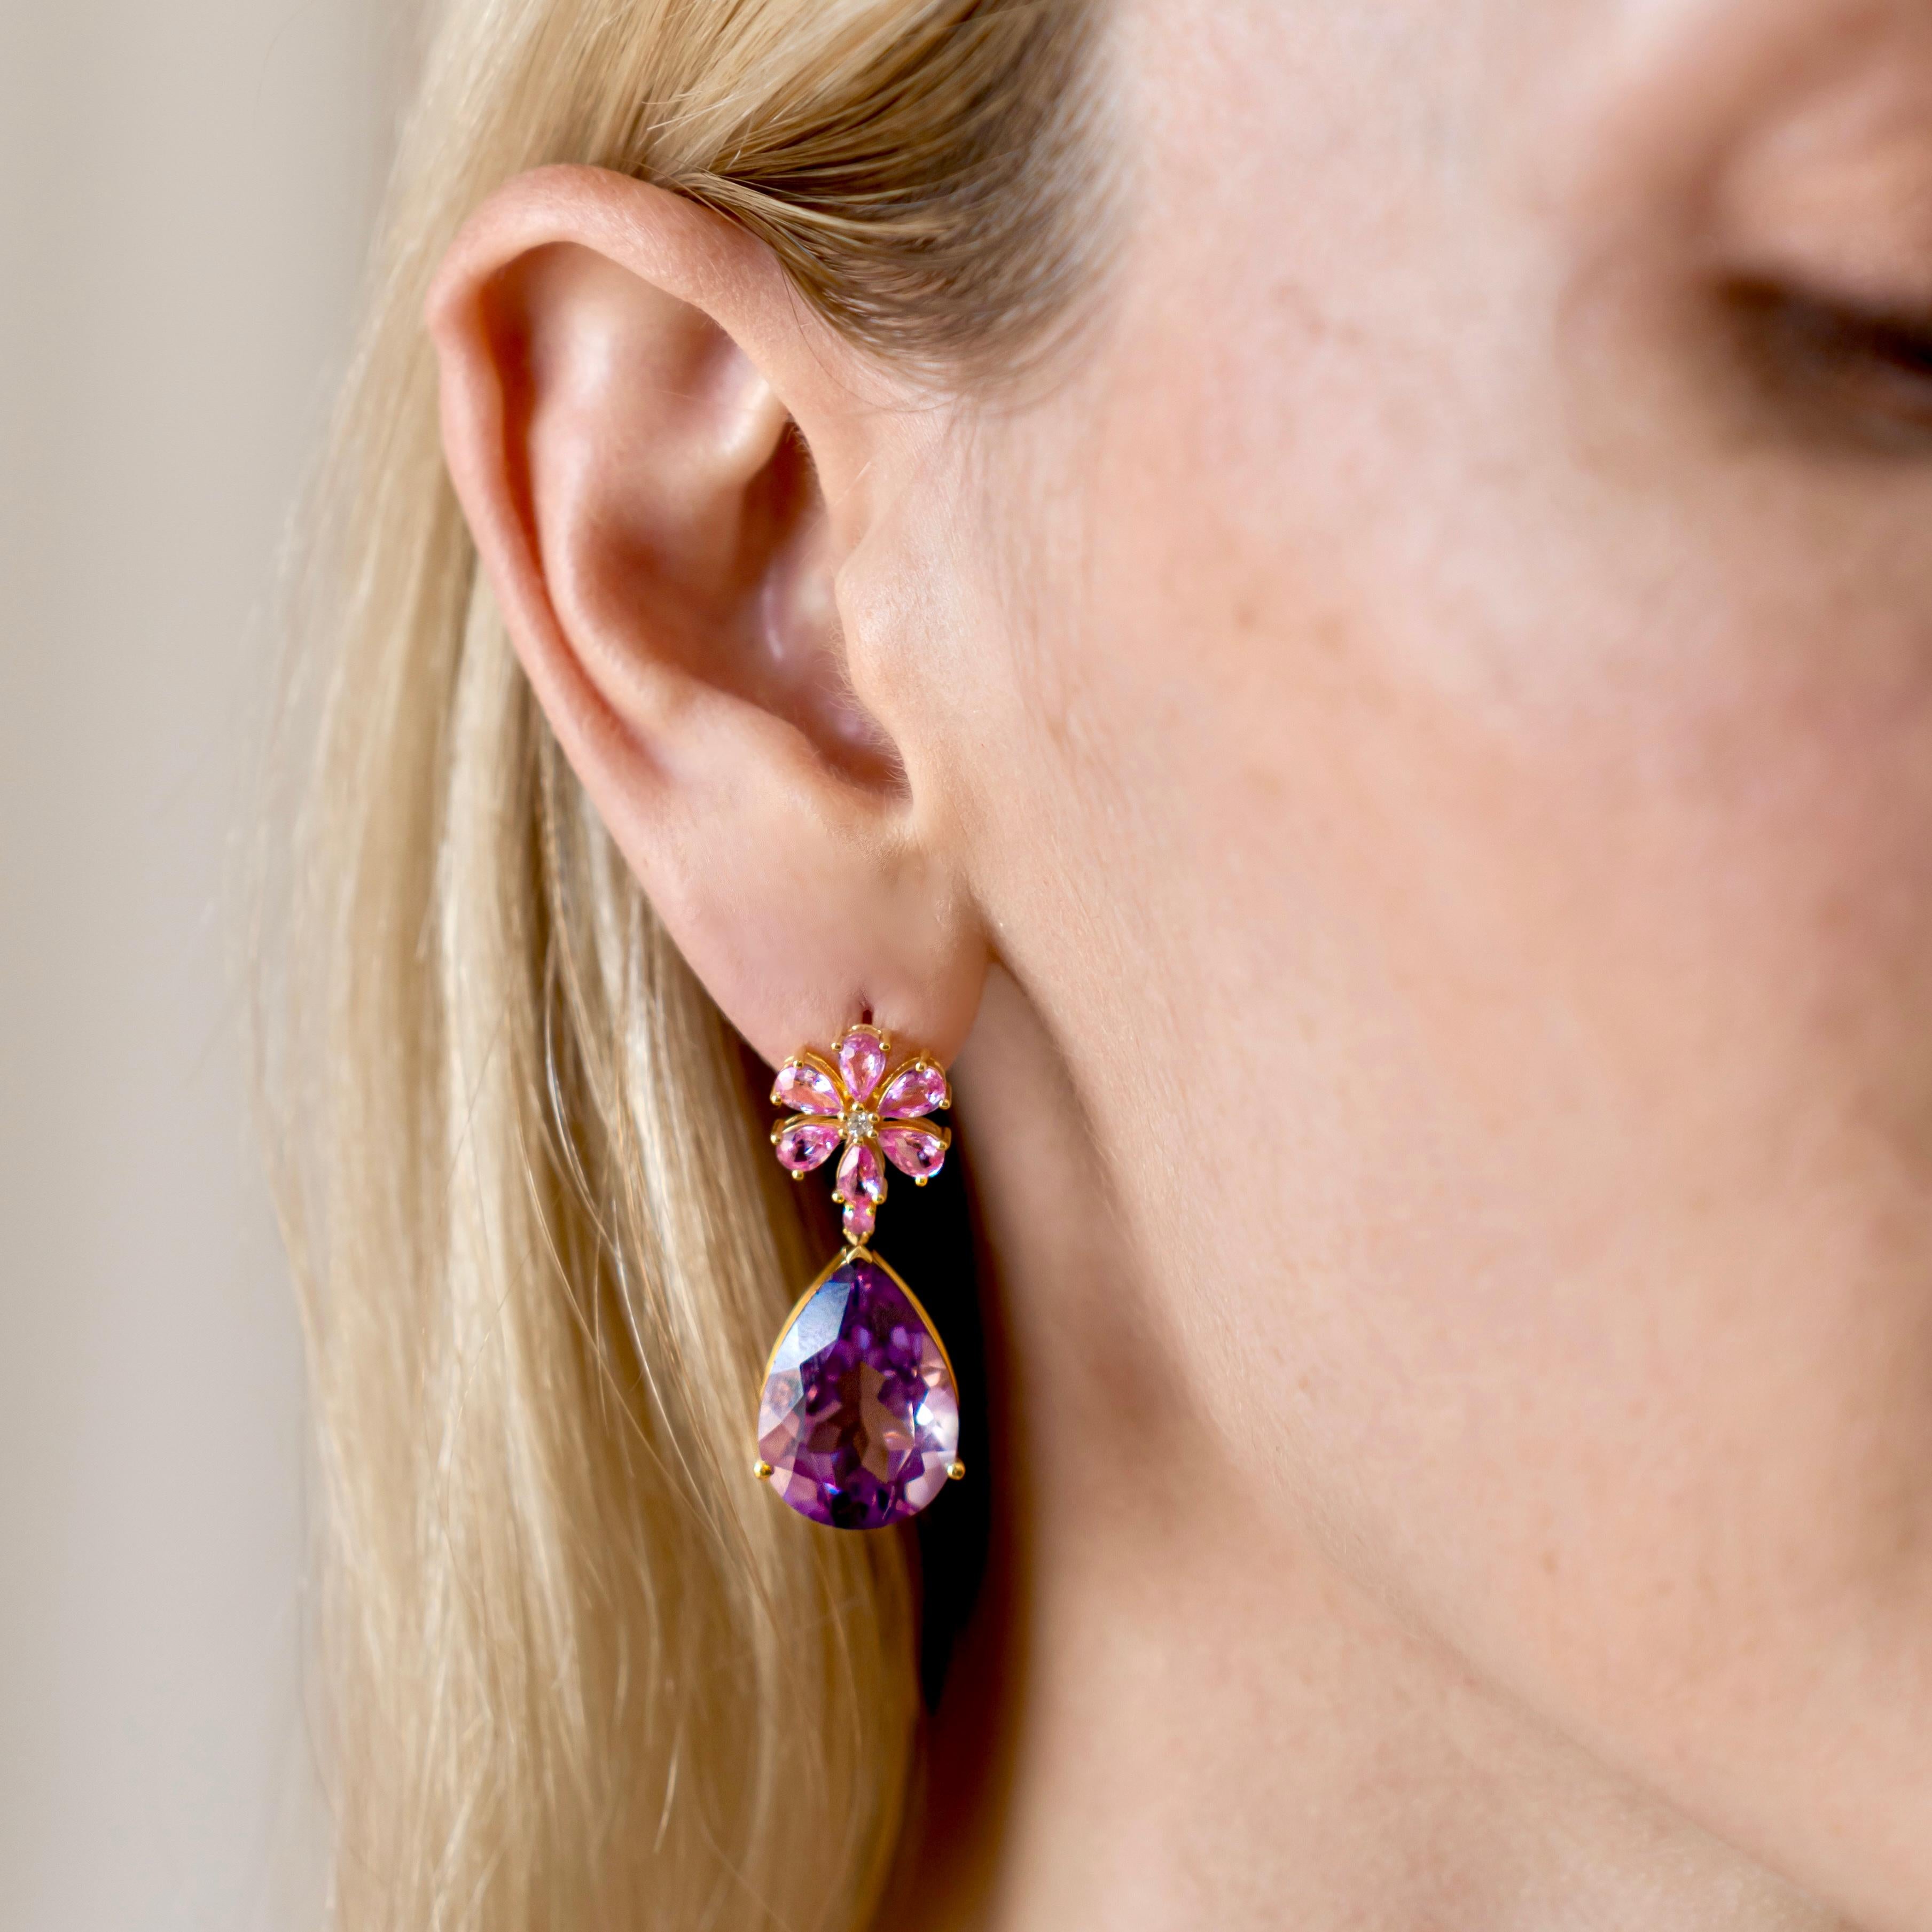 Experience the enchanting allure of Nina Zhou's Pink Sapphire Diamond Blossom 24ct Amethyst Drop Earrings, expertly crafted in radiant 14k yellow gold. Each earring begins with a delicate blossom, intricately formed by pink sapphires that capture